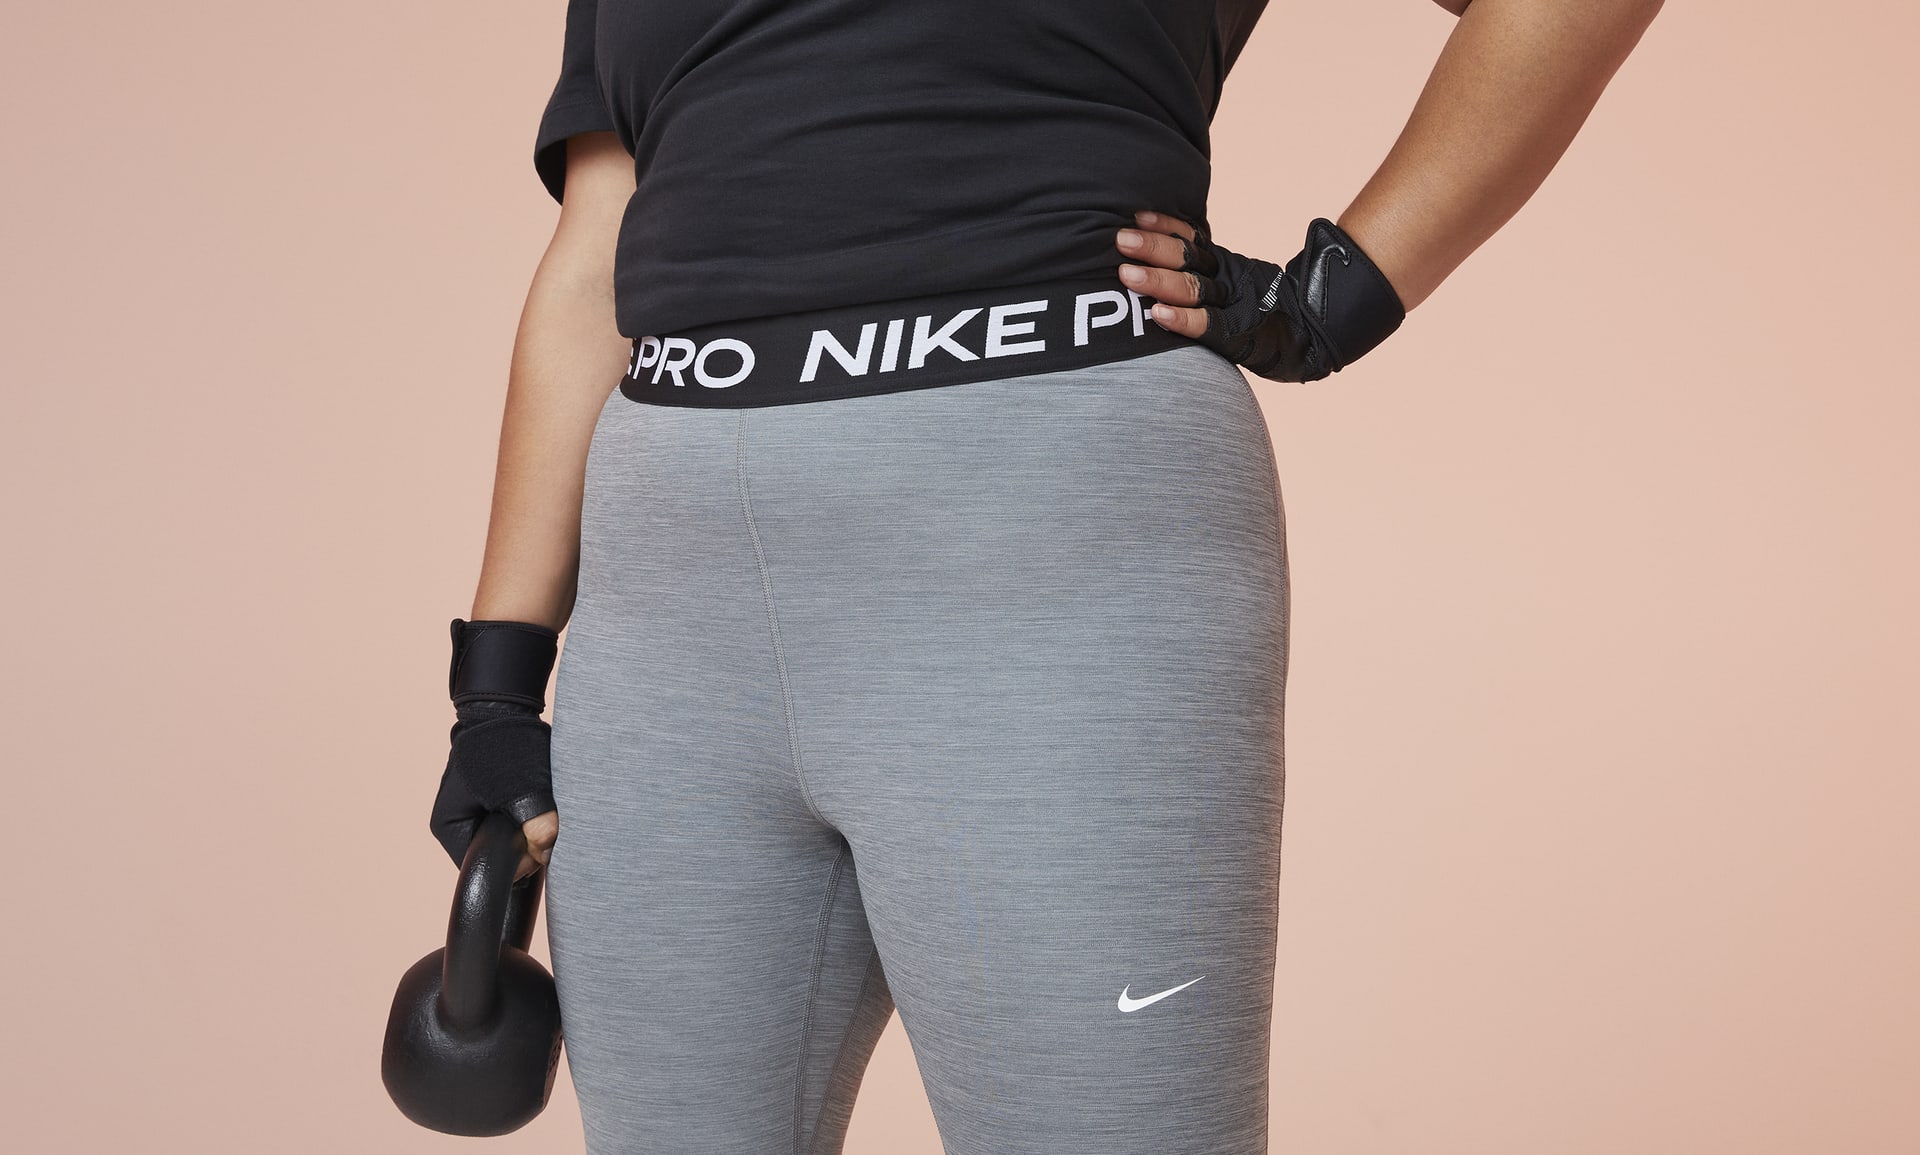 Nike Tights PRO in teal